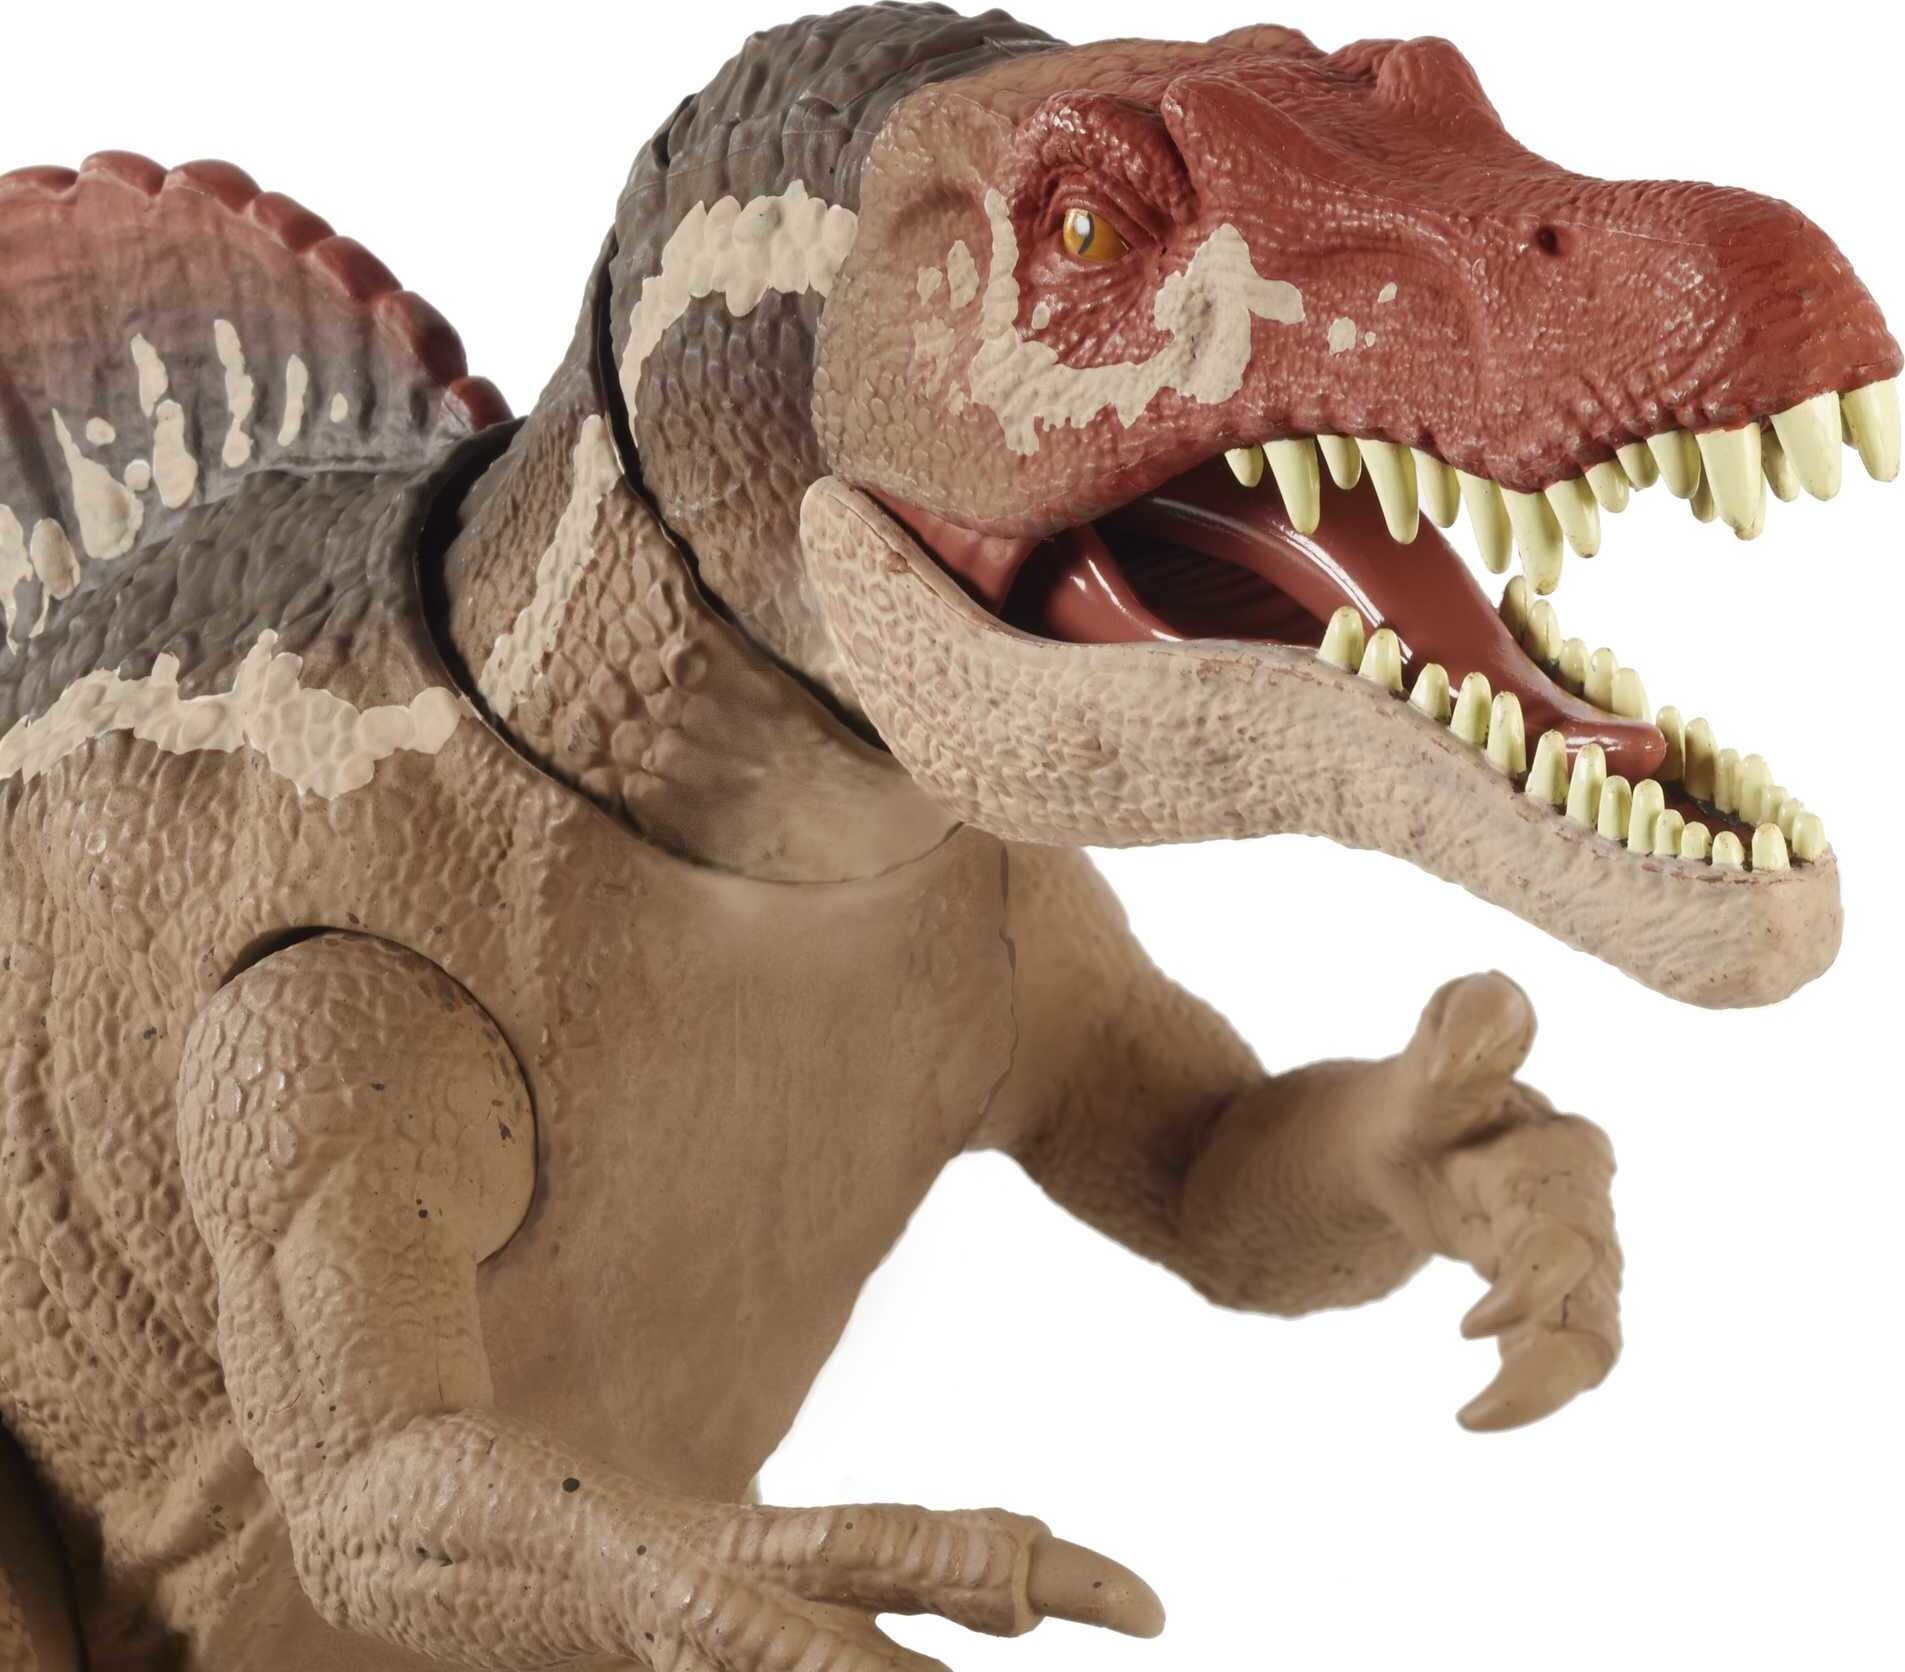 Huge Bite Movable Joints Ages 4 Years Old & Up Authentic Decoration Jurassic World Extreme Chompin' Spinosaurus Dinosaur Action Figure 